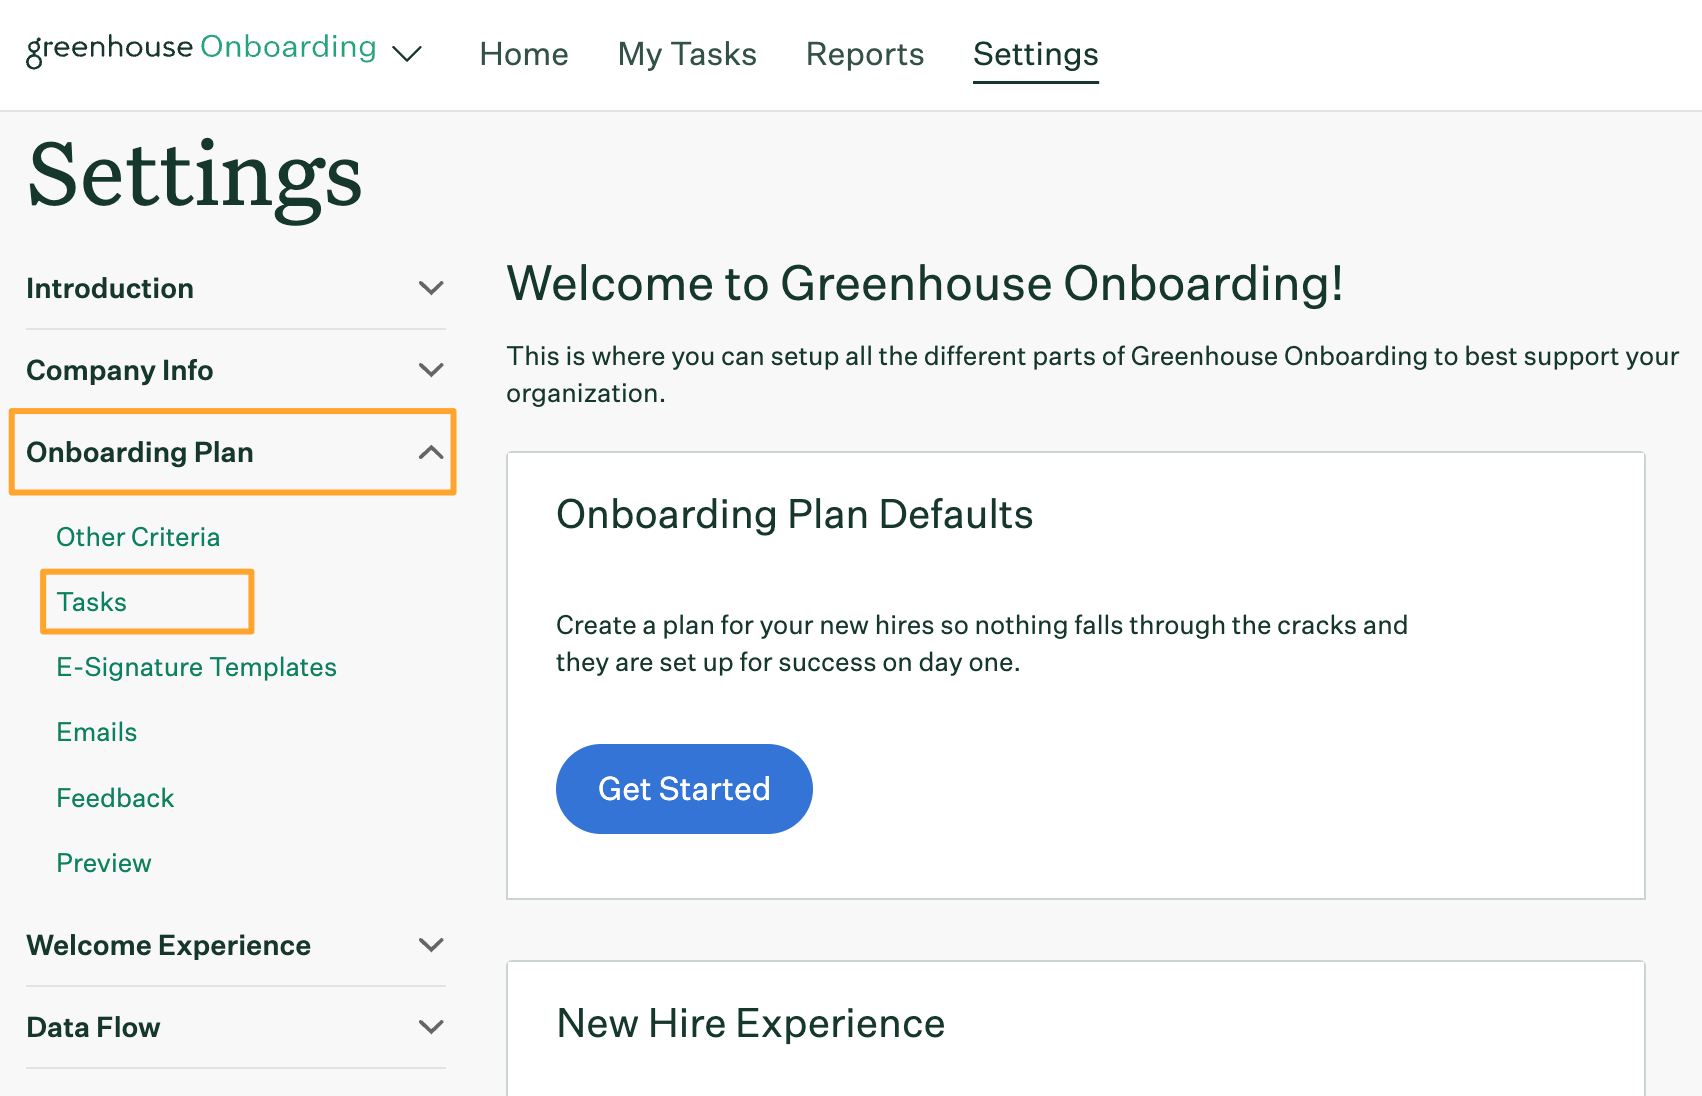 Greenhouse Onboarding Settings page with Onboarding Plan and Tasks tabs highlighted